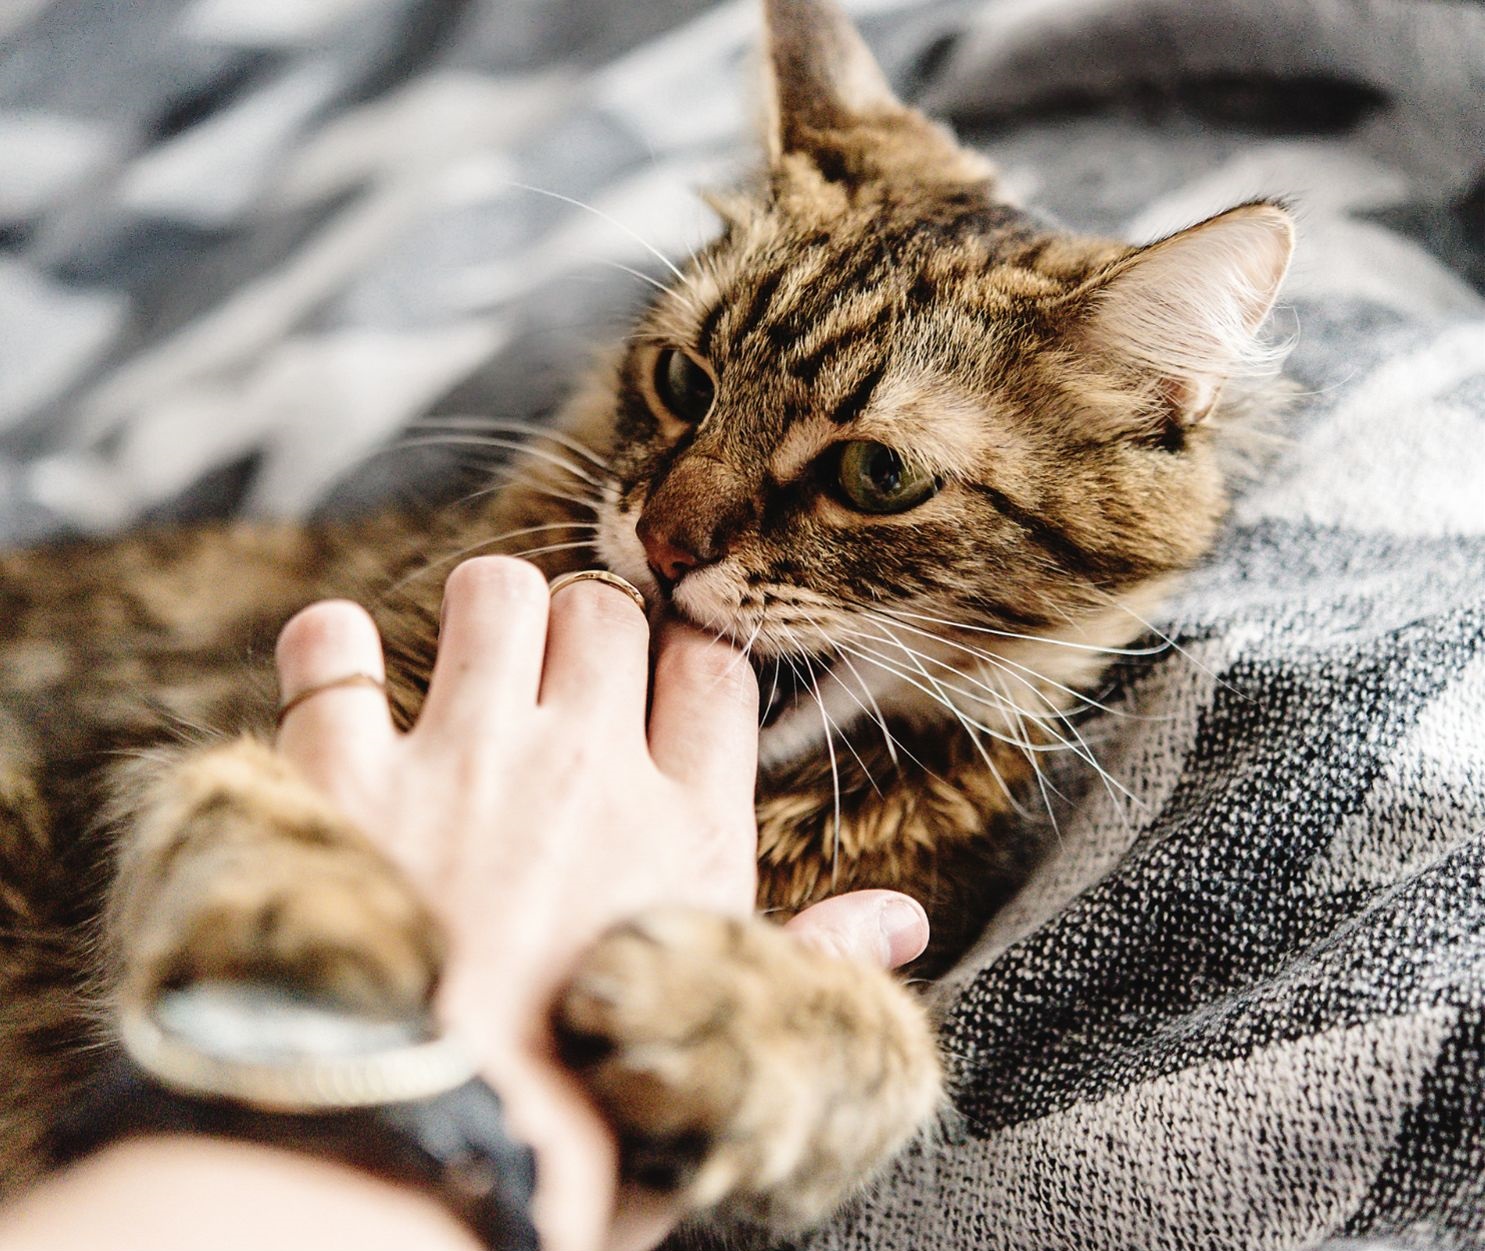 Why Cats Suddenly Bite While Petting Them?